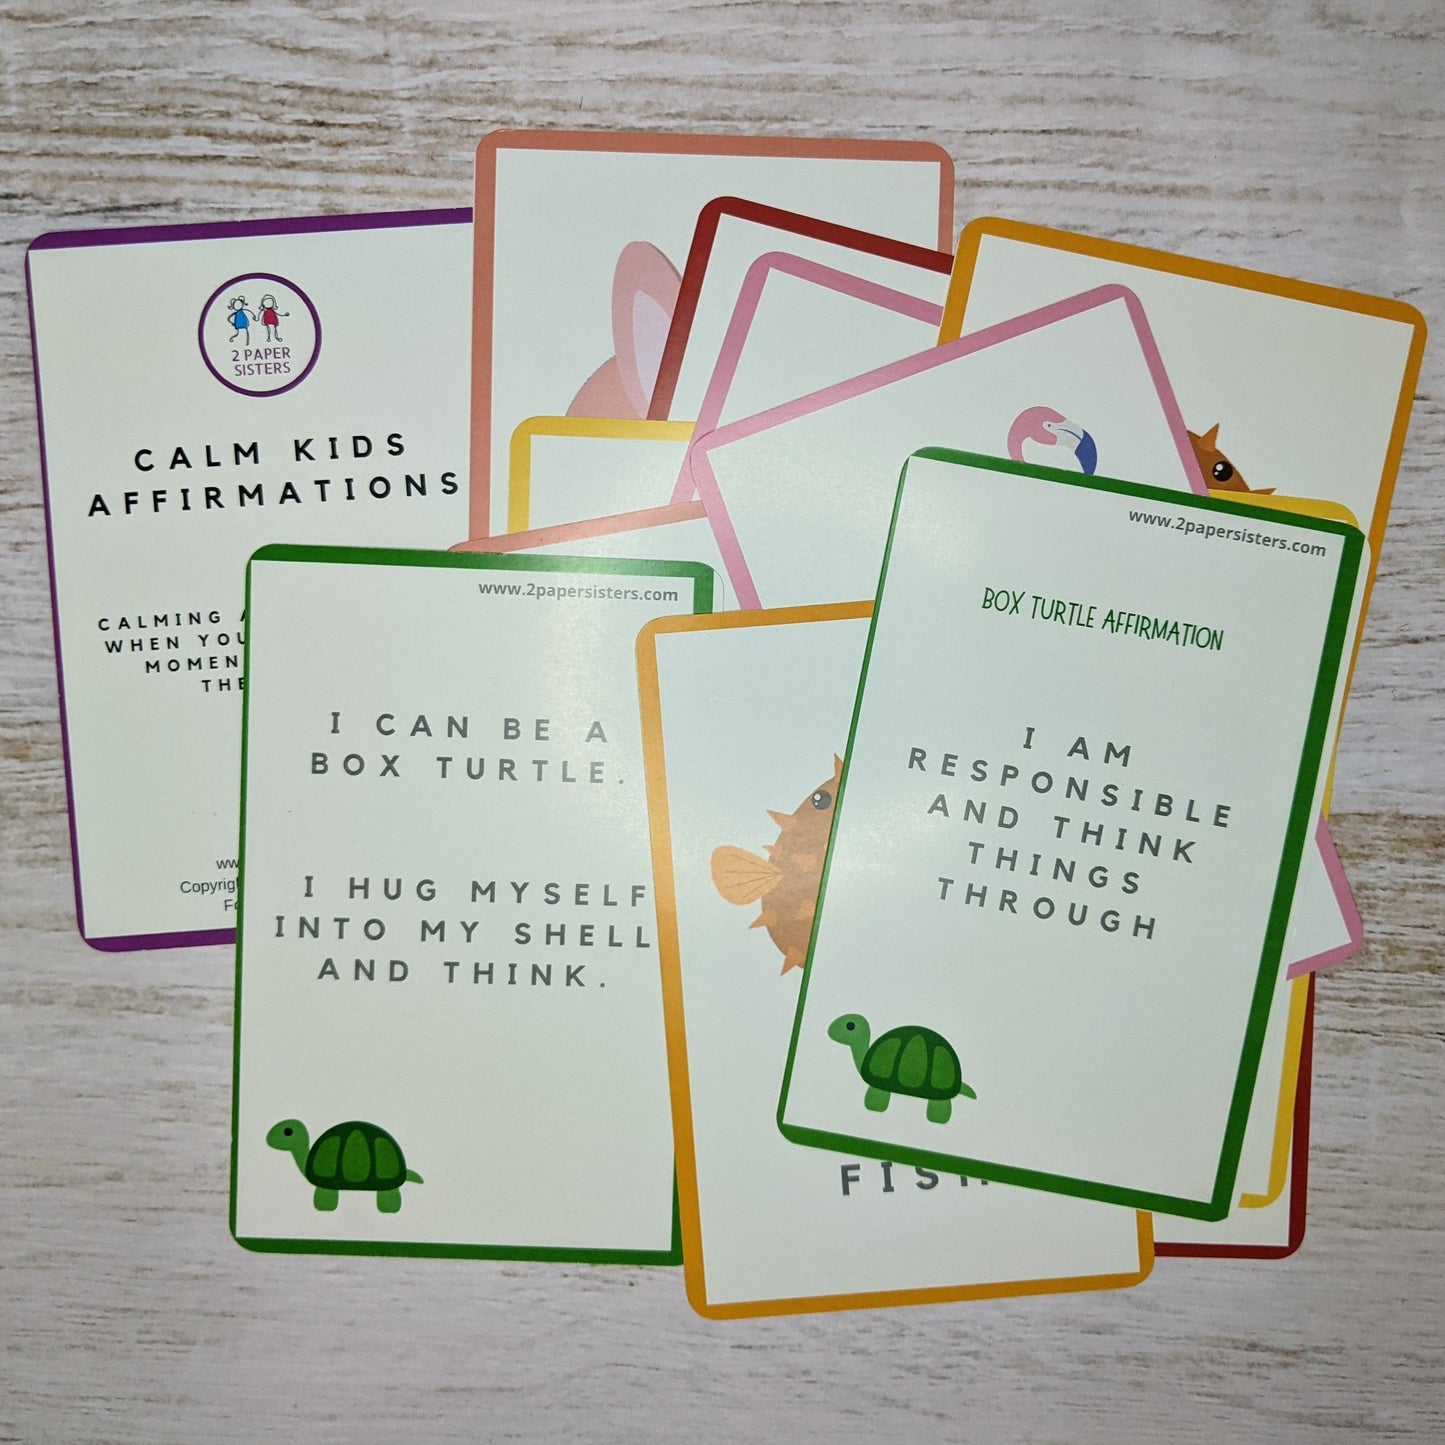 Calm Kids Cards: Help Your Kids Manage Difficult Emotions